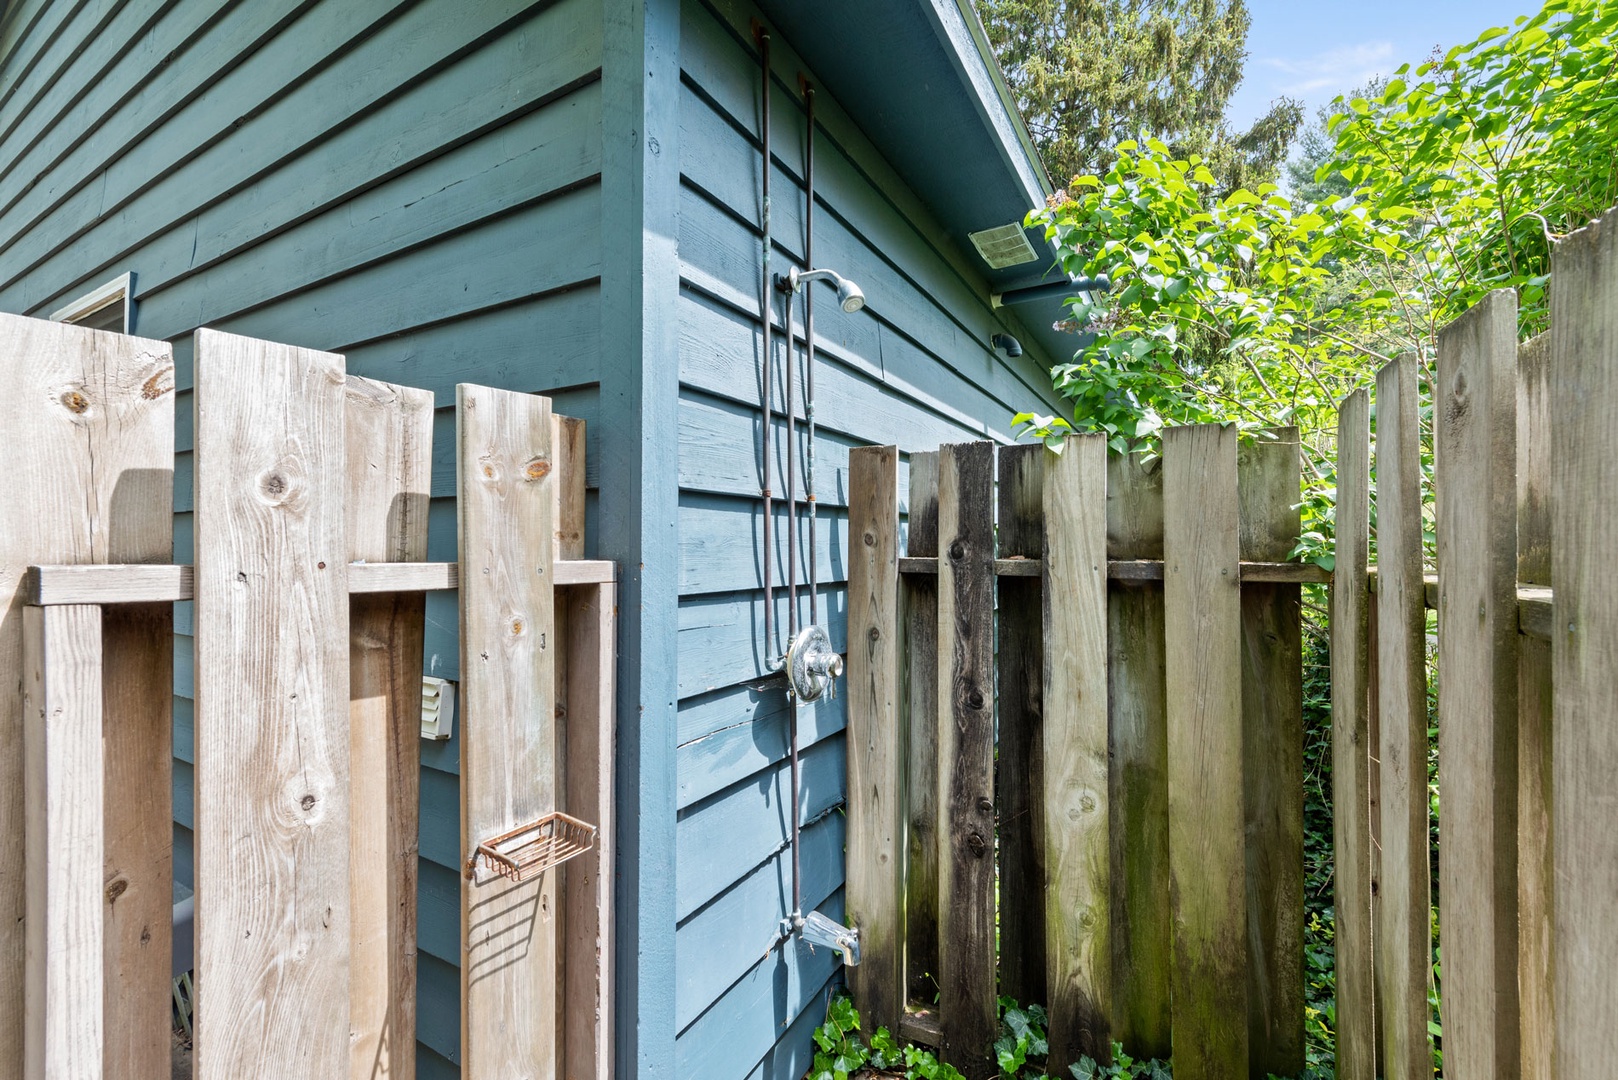 An outdoor shower is the perfect amenity for after the beach!